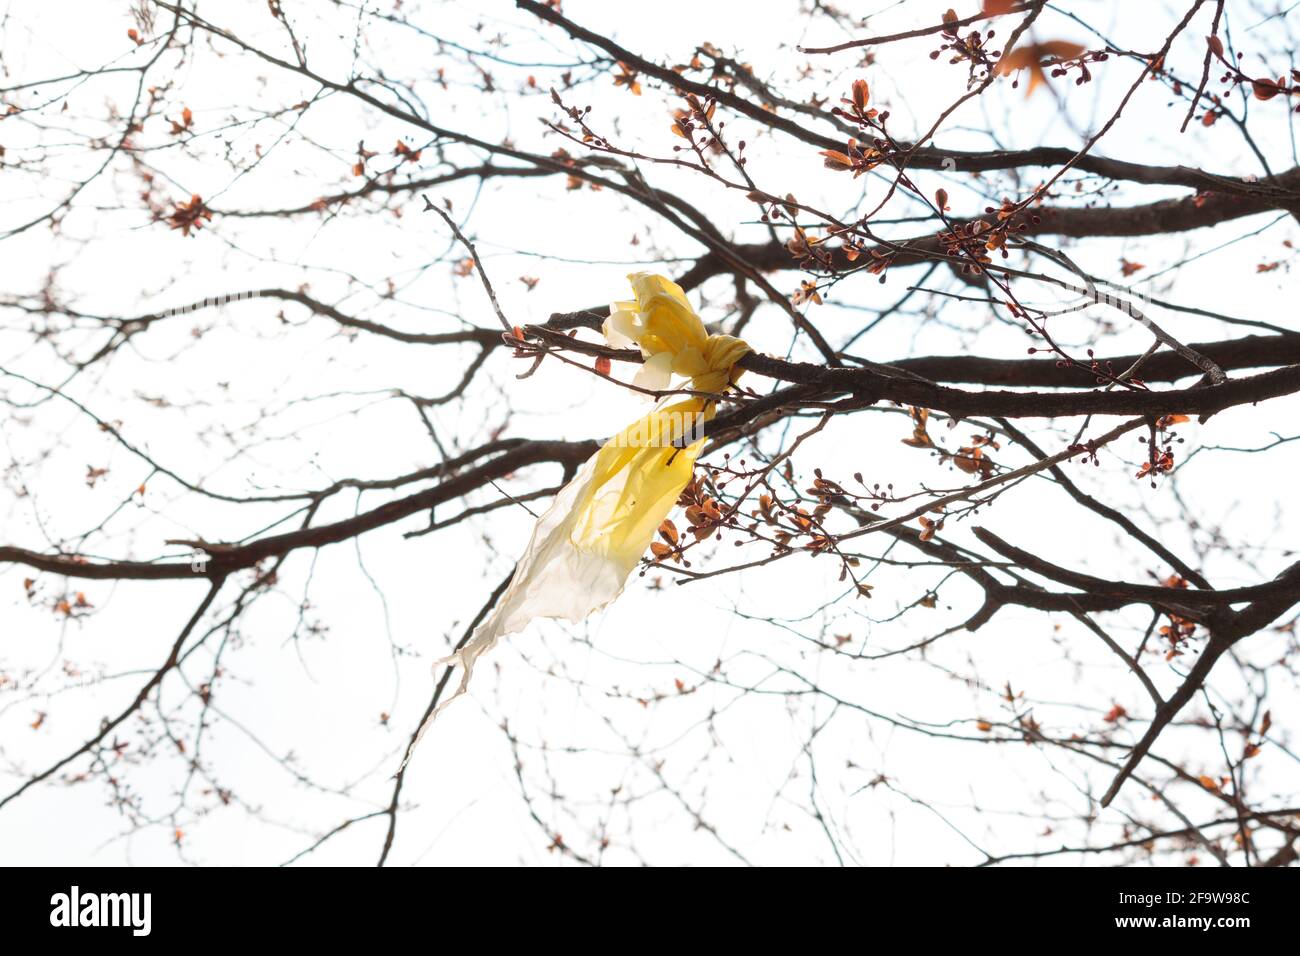 yellow plastic bag tied to a tree branch in early Spring, a symbol of plastic waste, pollution, littering and human behavior damaging the environment Stock Photo